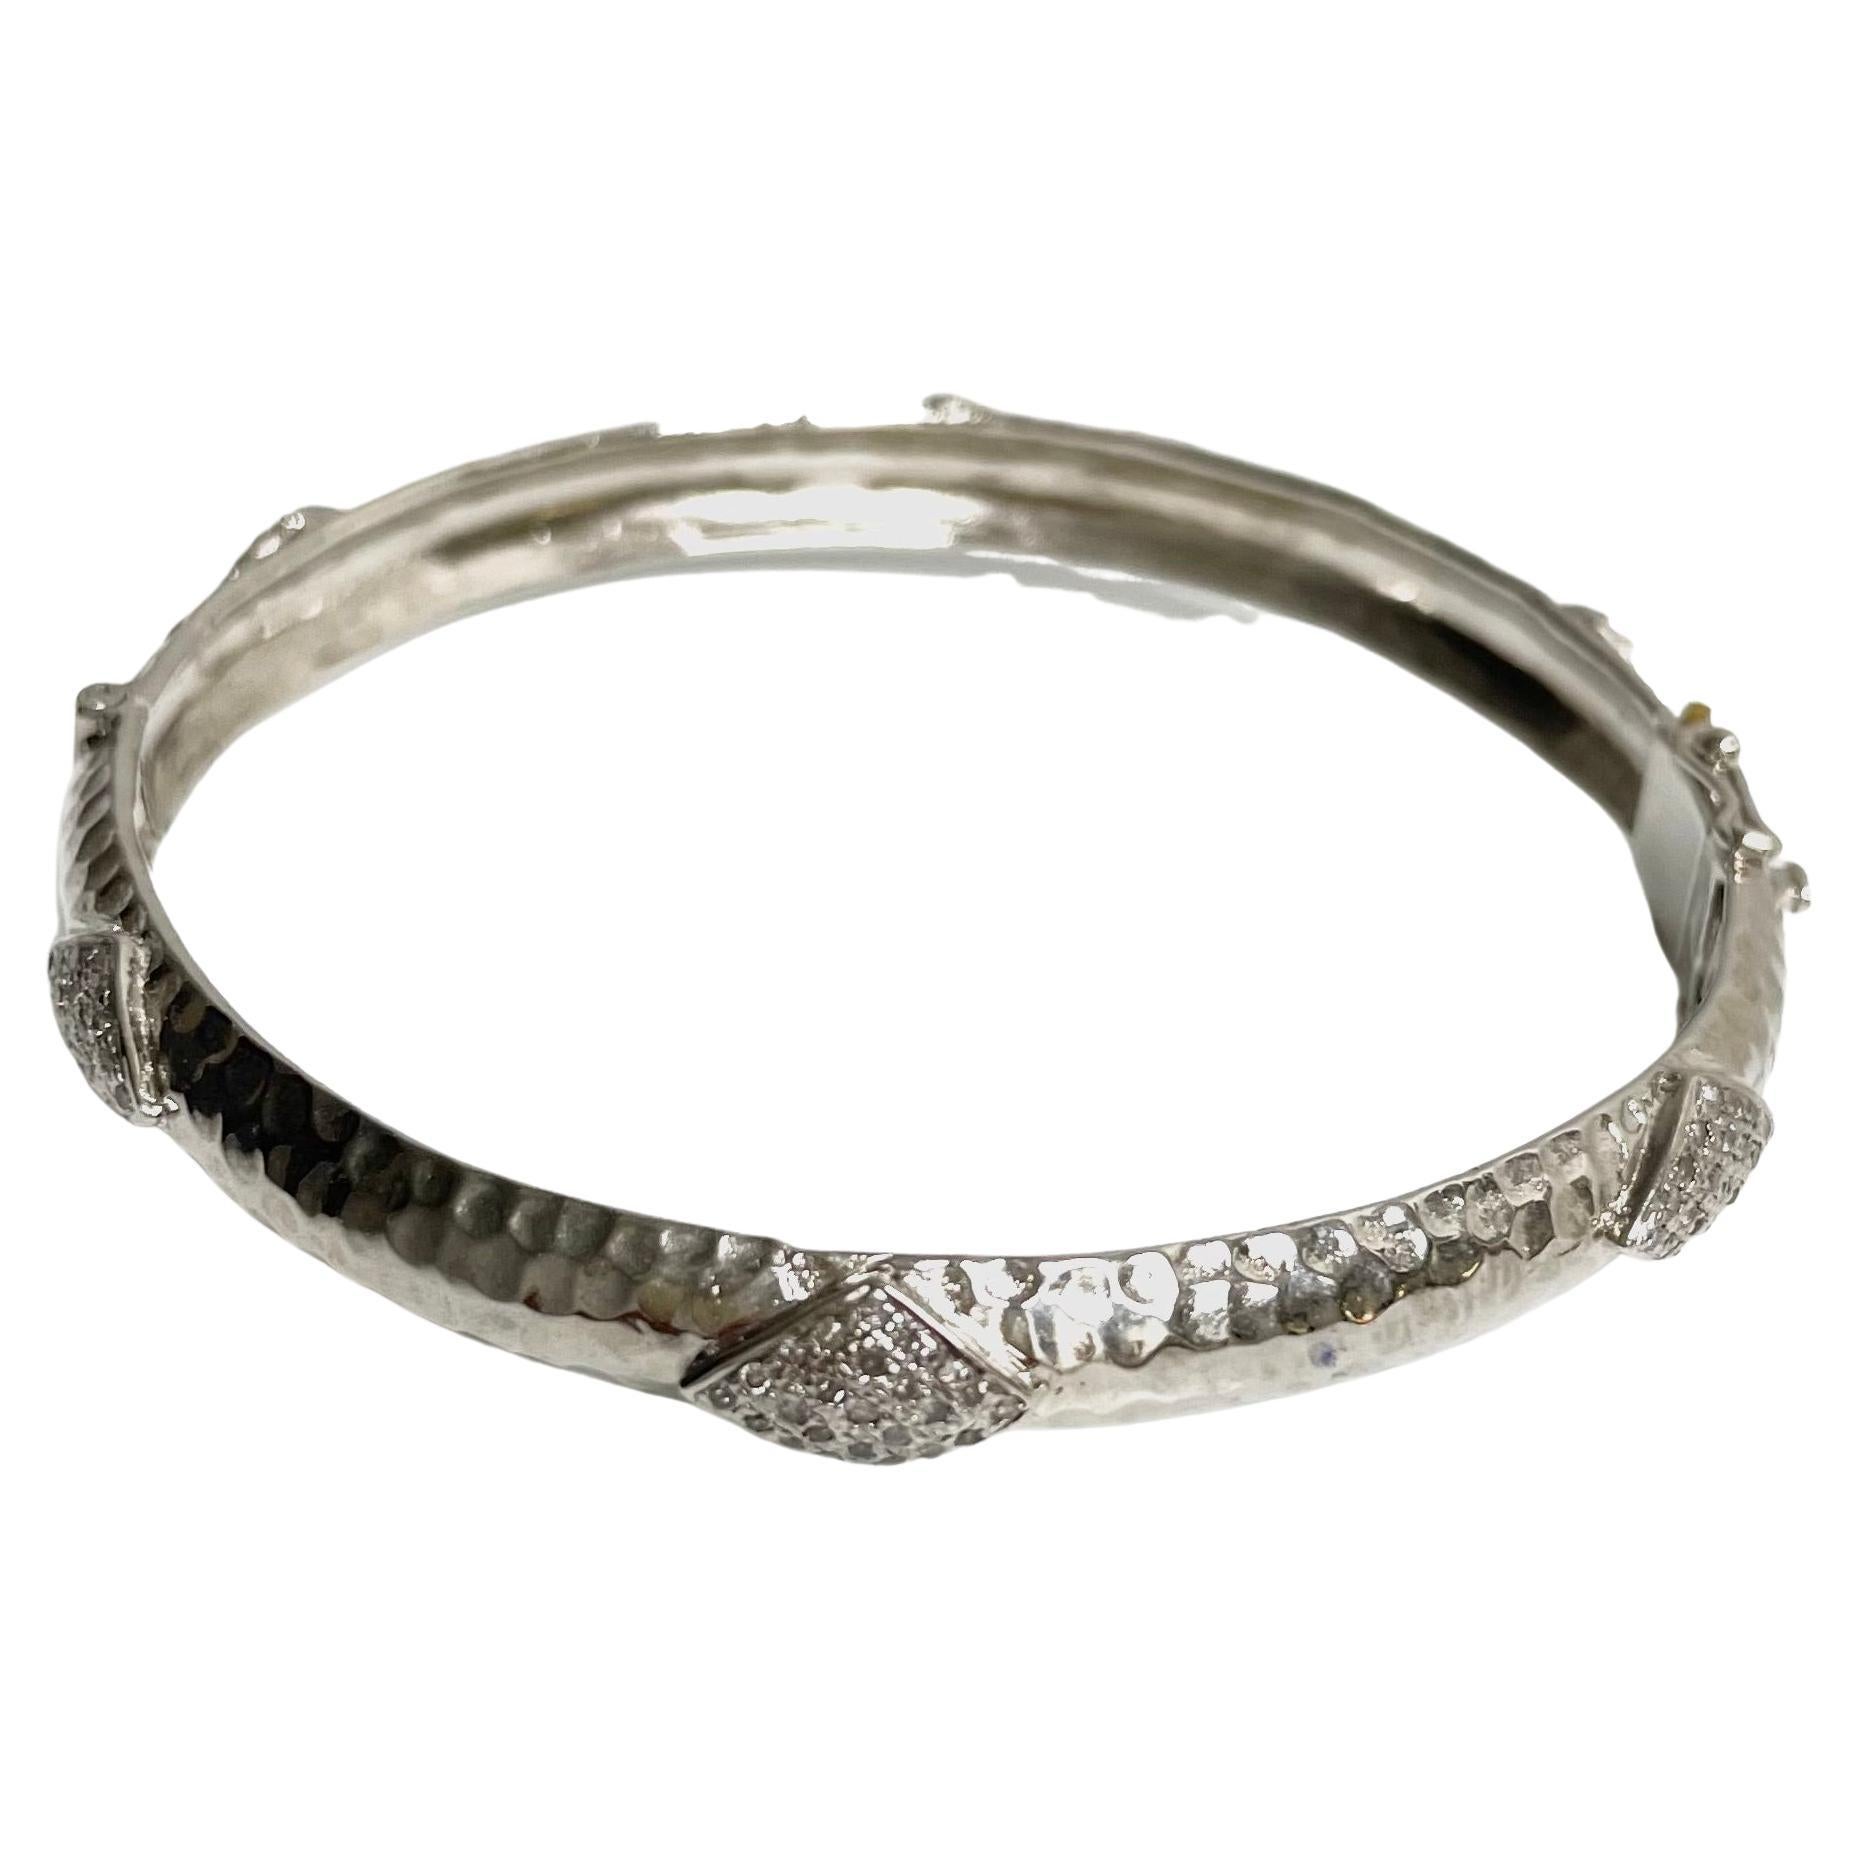  Hammered Rhodium-Plated Silver Bangle with Diamonds Paradizia Bracelet For Sale 2